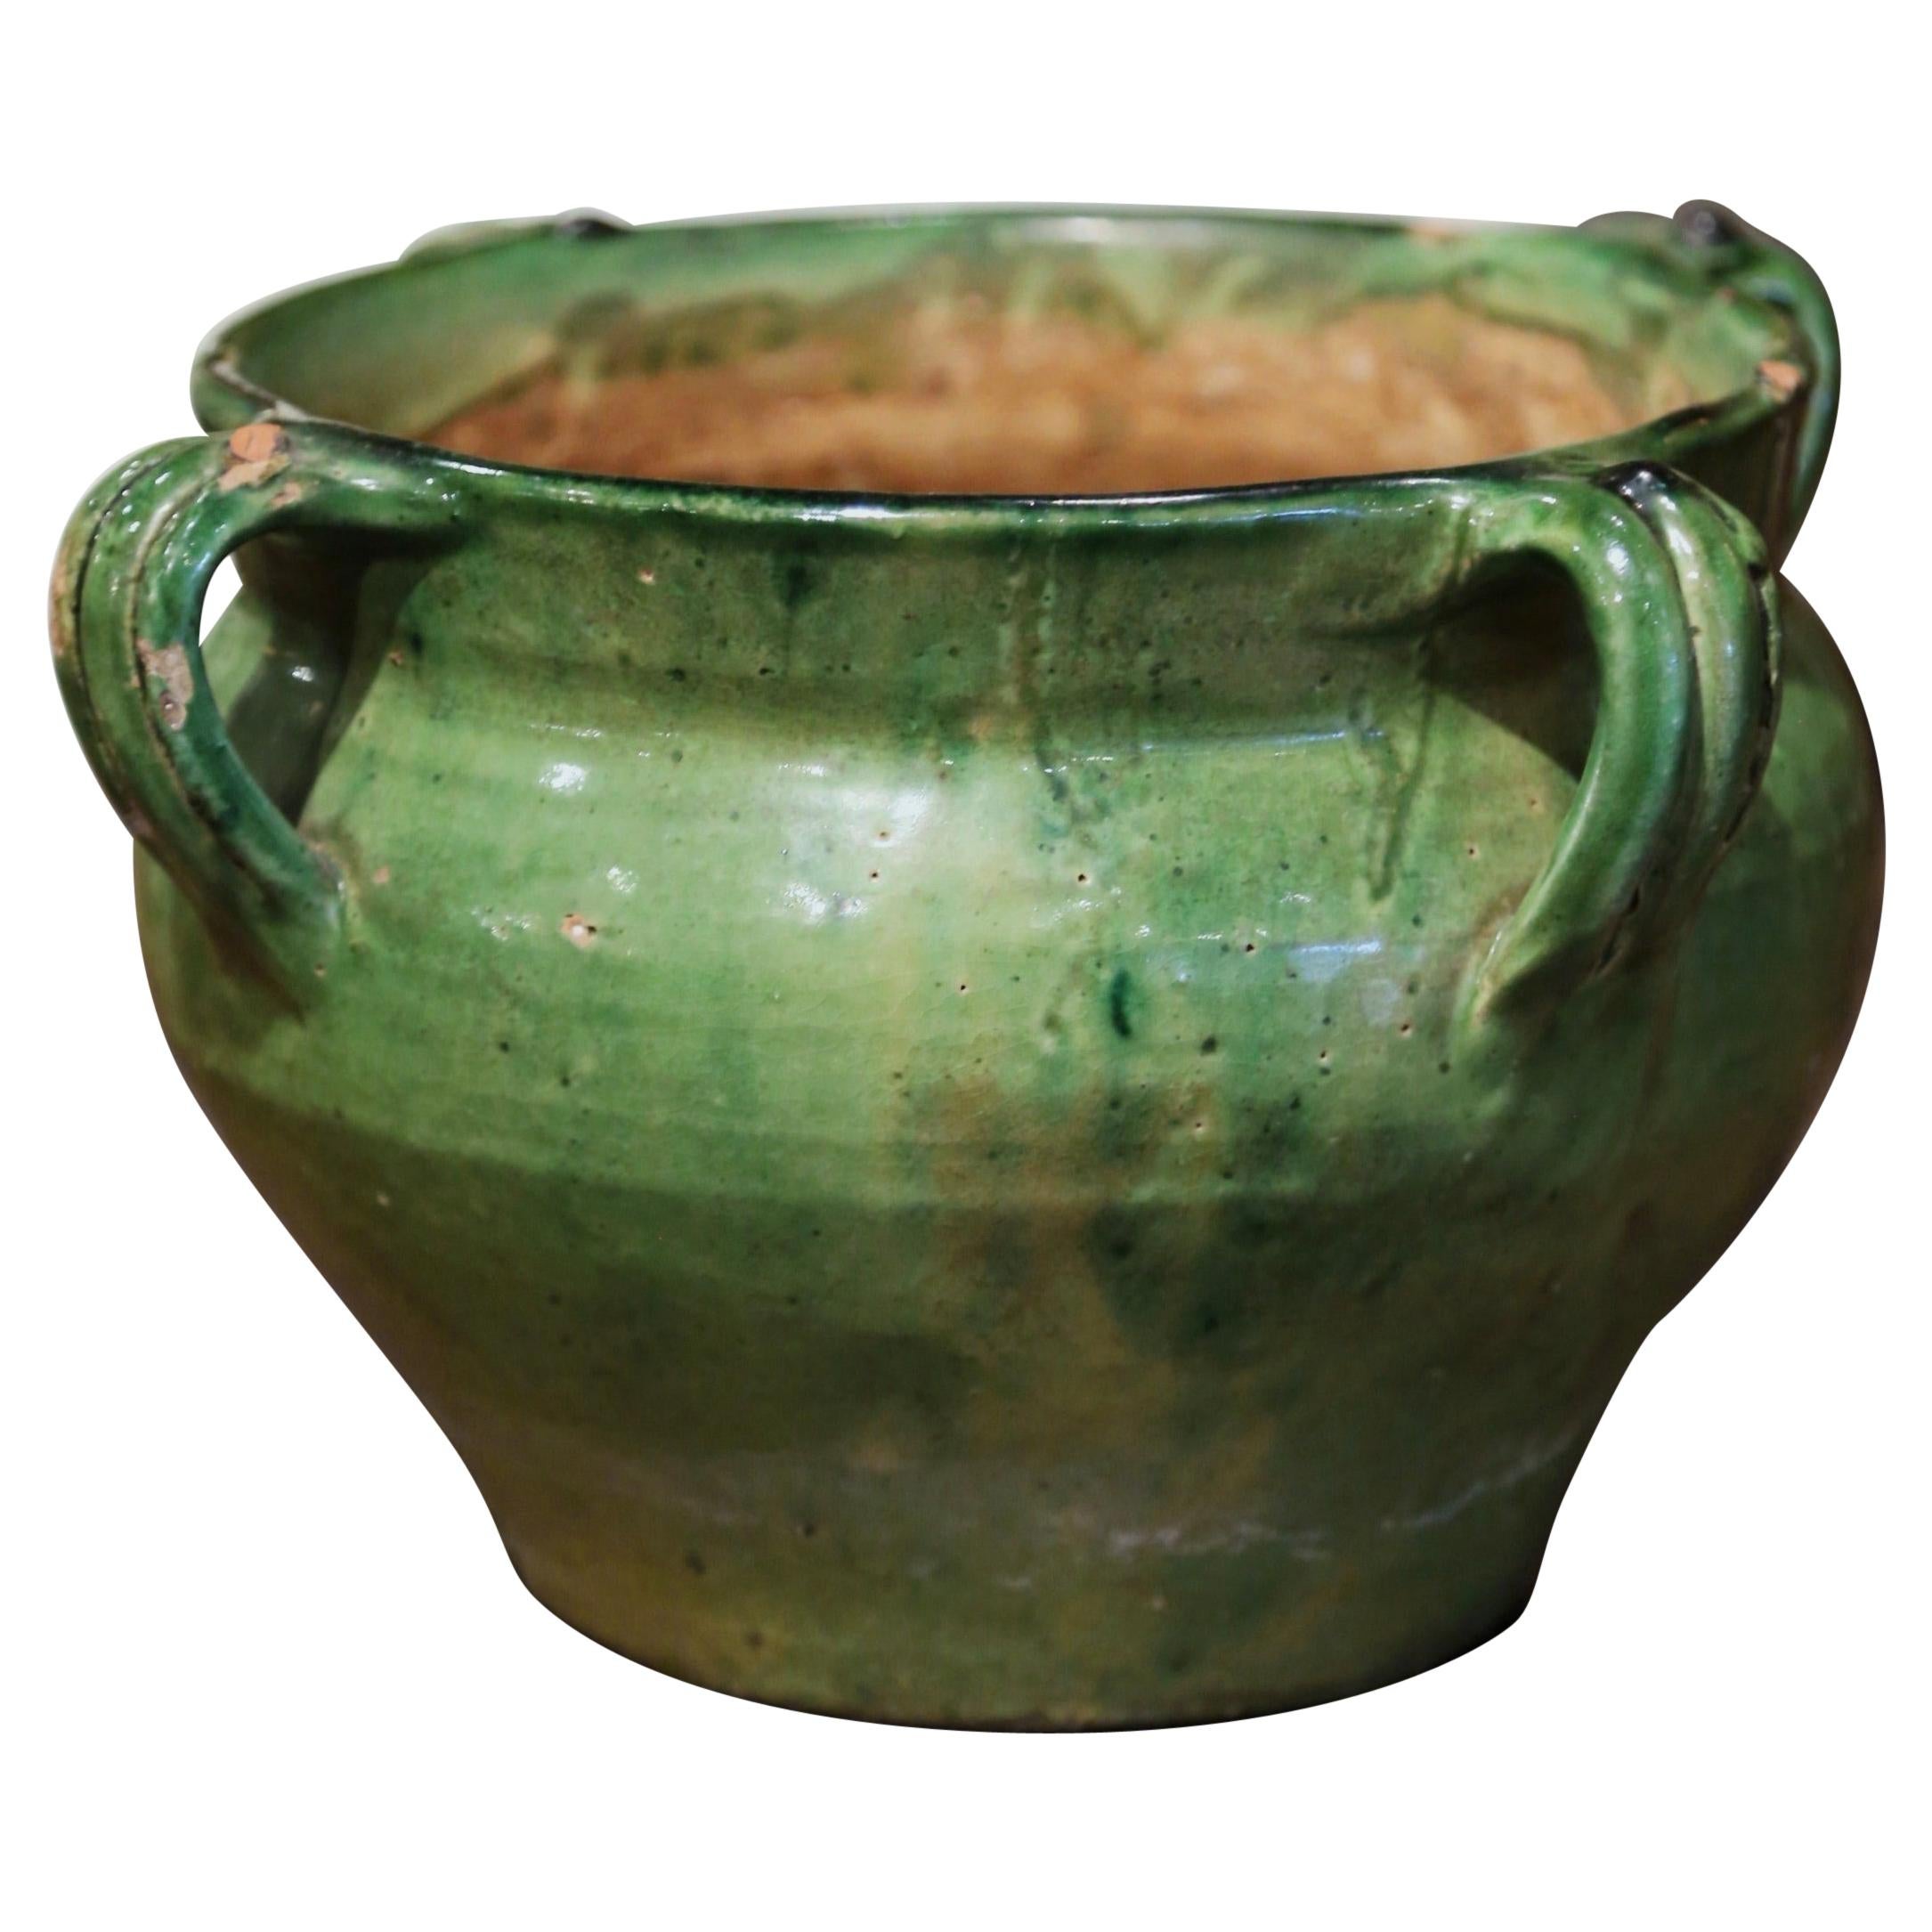 19th Century French Green Glazed Pottery Flower Cache Pot from Provence